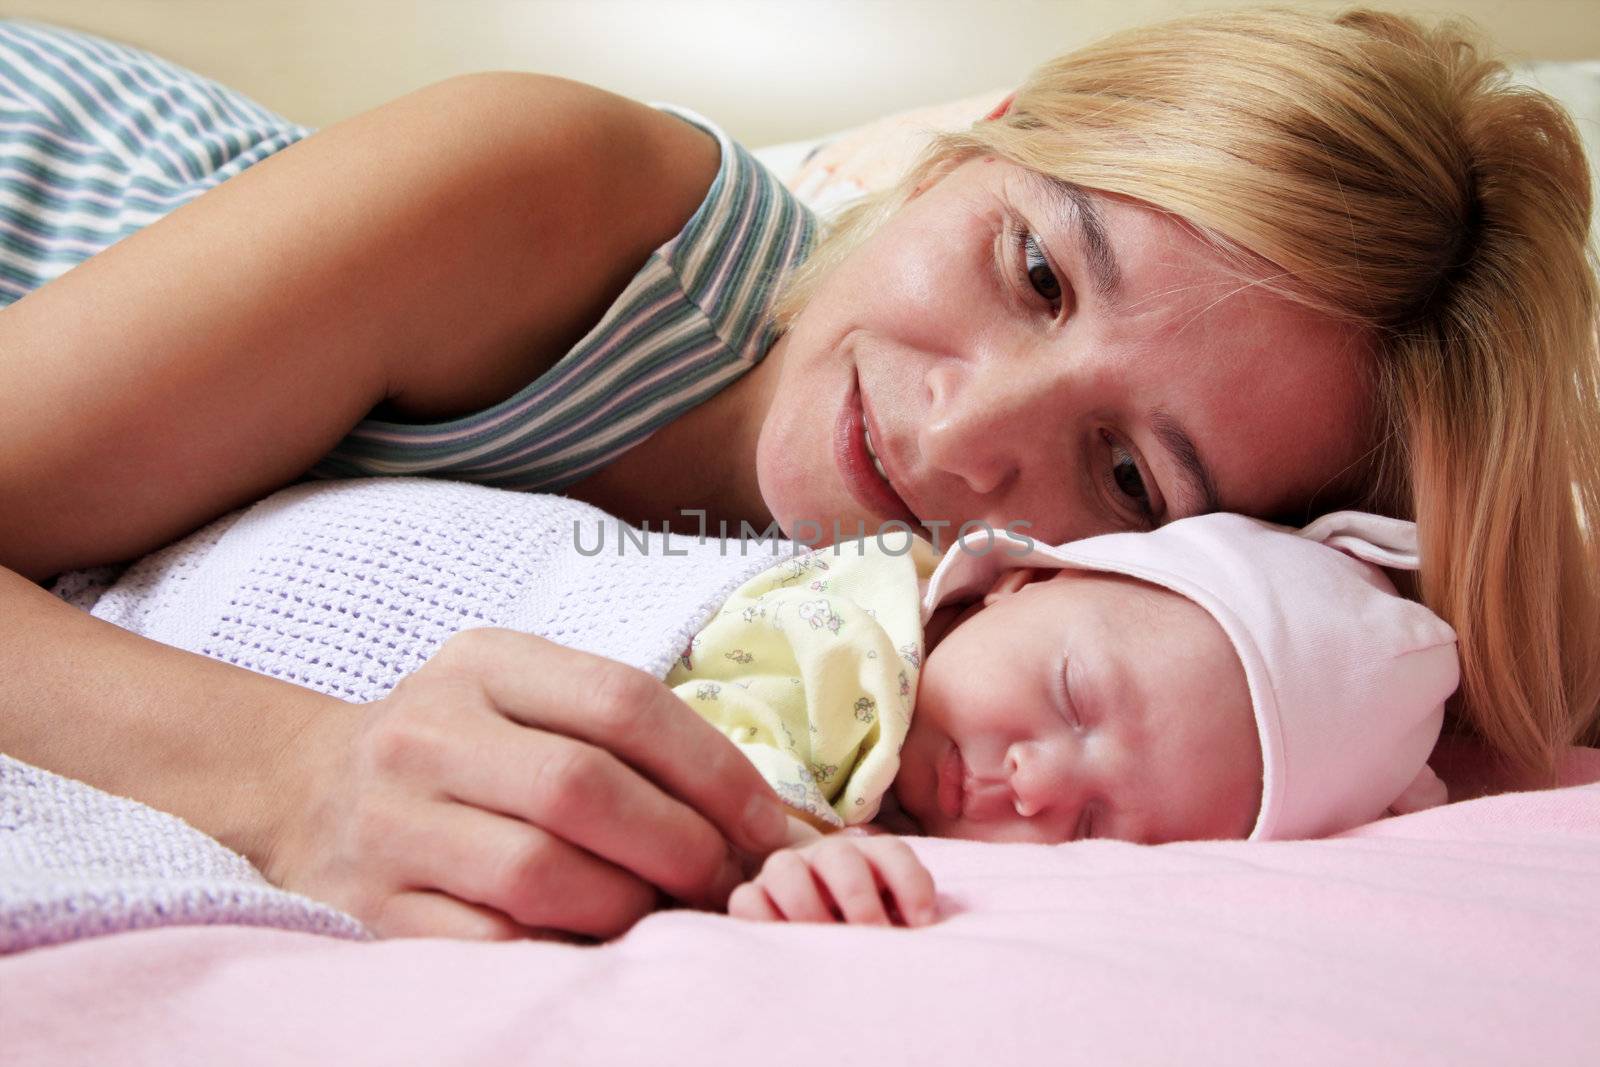 Mother with her sleeping newborn baby in home